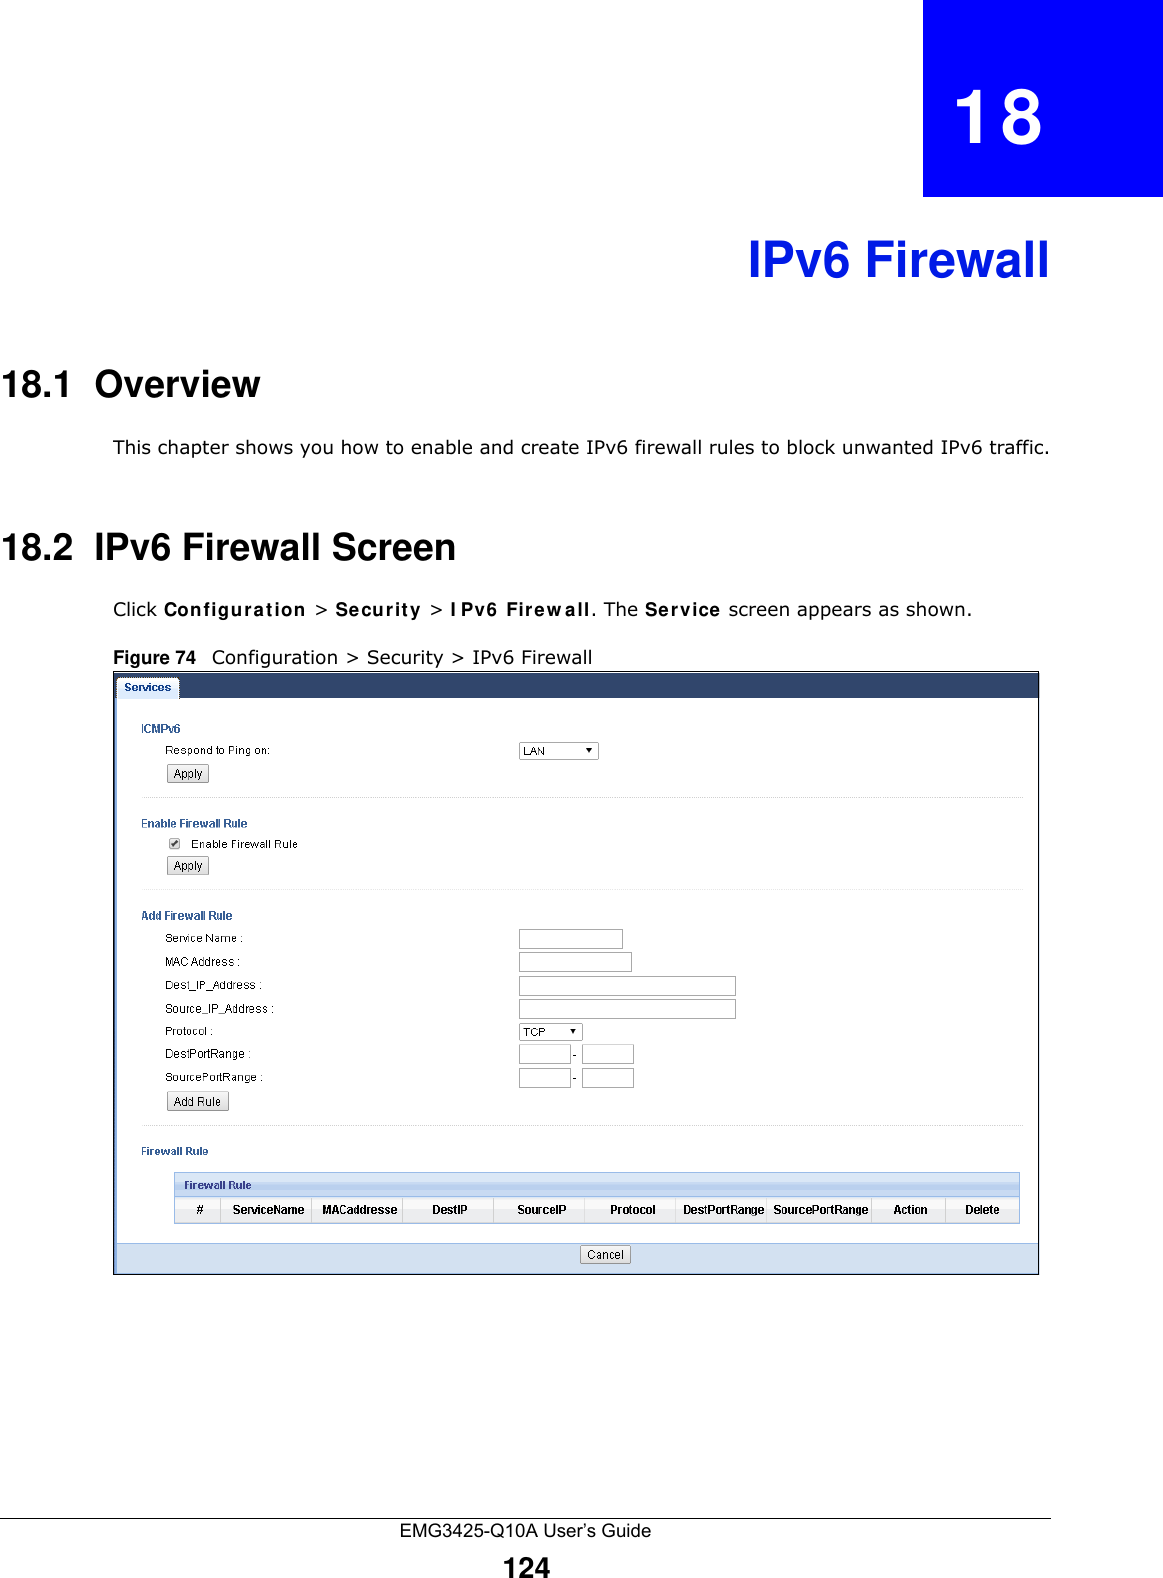 EMG3425-Q10A User’s Guide124CHAPTER   18IPv6 Firewall18.1  Overview This chapter shows you how to enable and create IPv6 firewall rules to block unwanted IPv6 traffic.18.2  IPv6 Firewall Screen Click Configu r a t ion  &gt; Securit y &gt; I Pv6  Firew all. The Service screen appears as shown.Figure 74   Configuration &gt; Security &gt; IPv6 Firewall